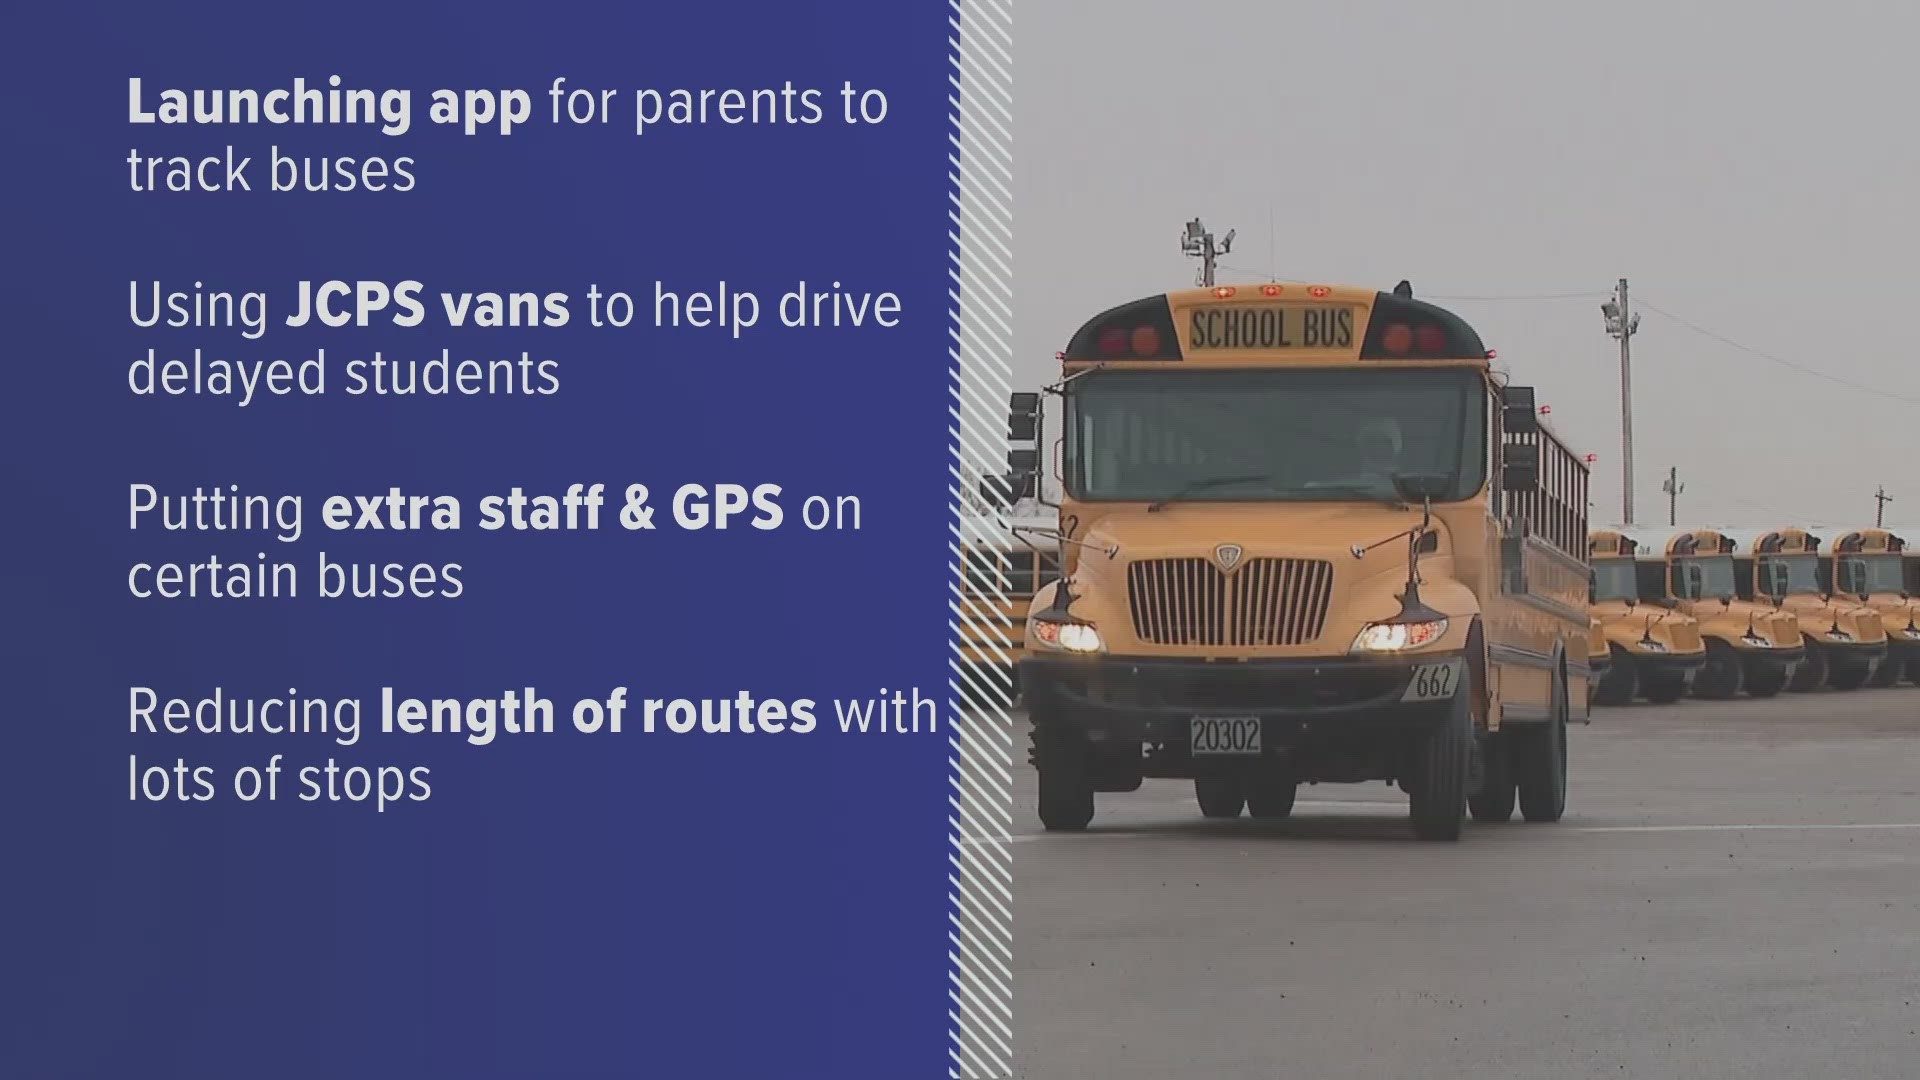 Superintendent Dr. Marty Pollio has laid out plans to reopen schools following transportation issues on the first day.